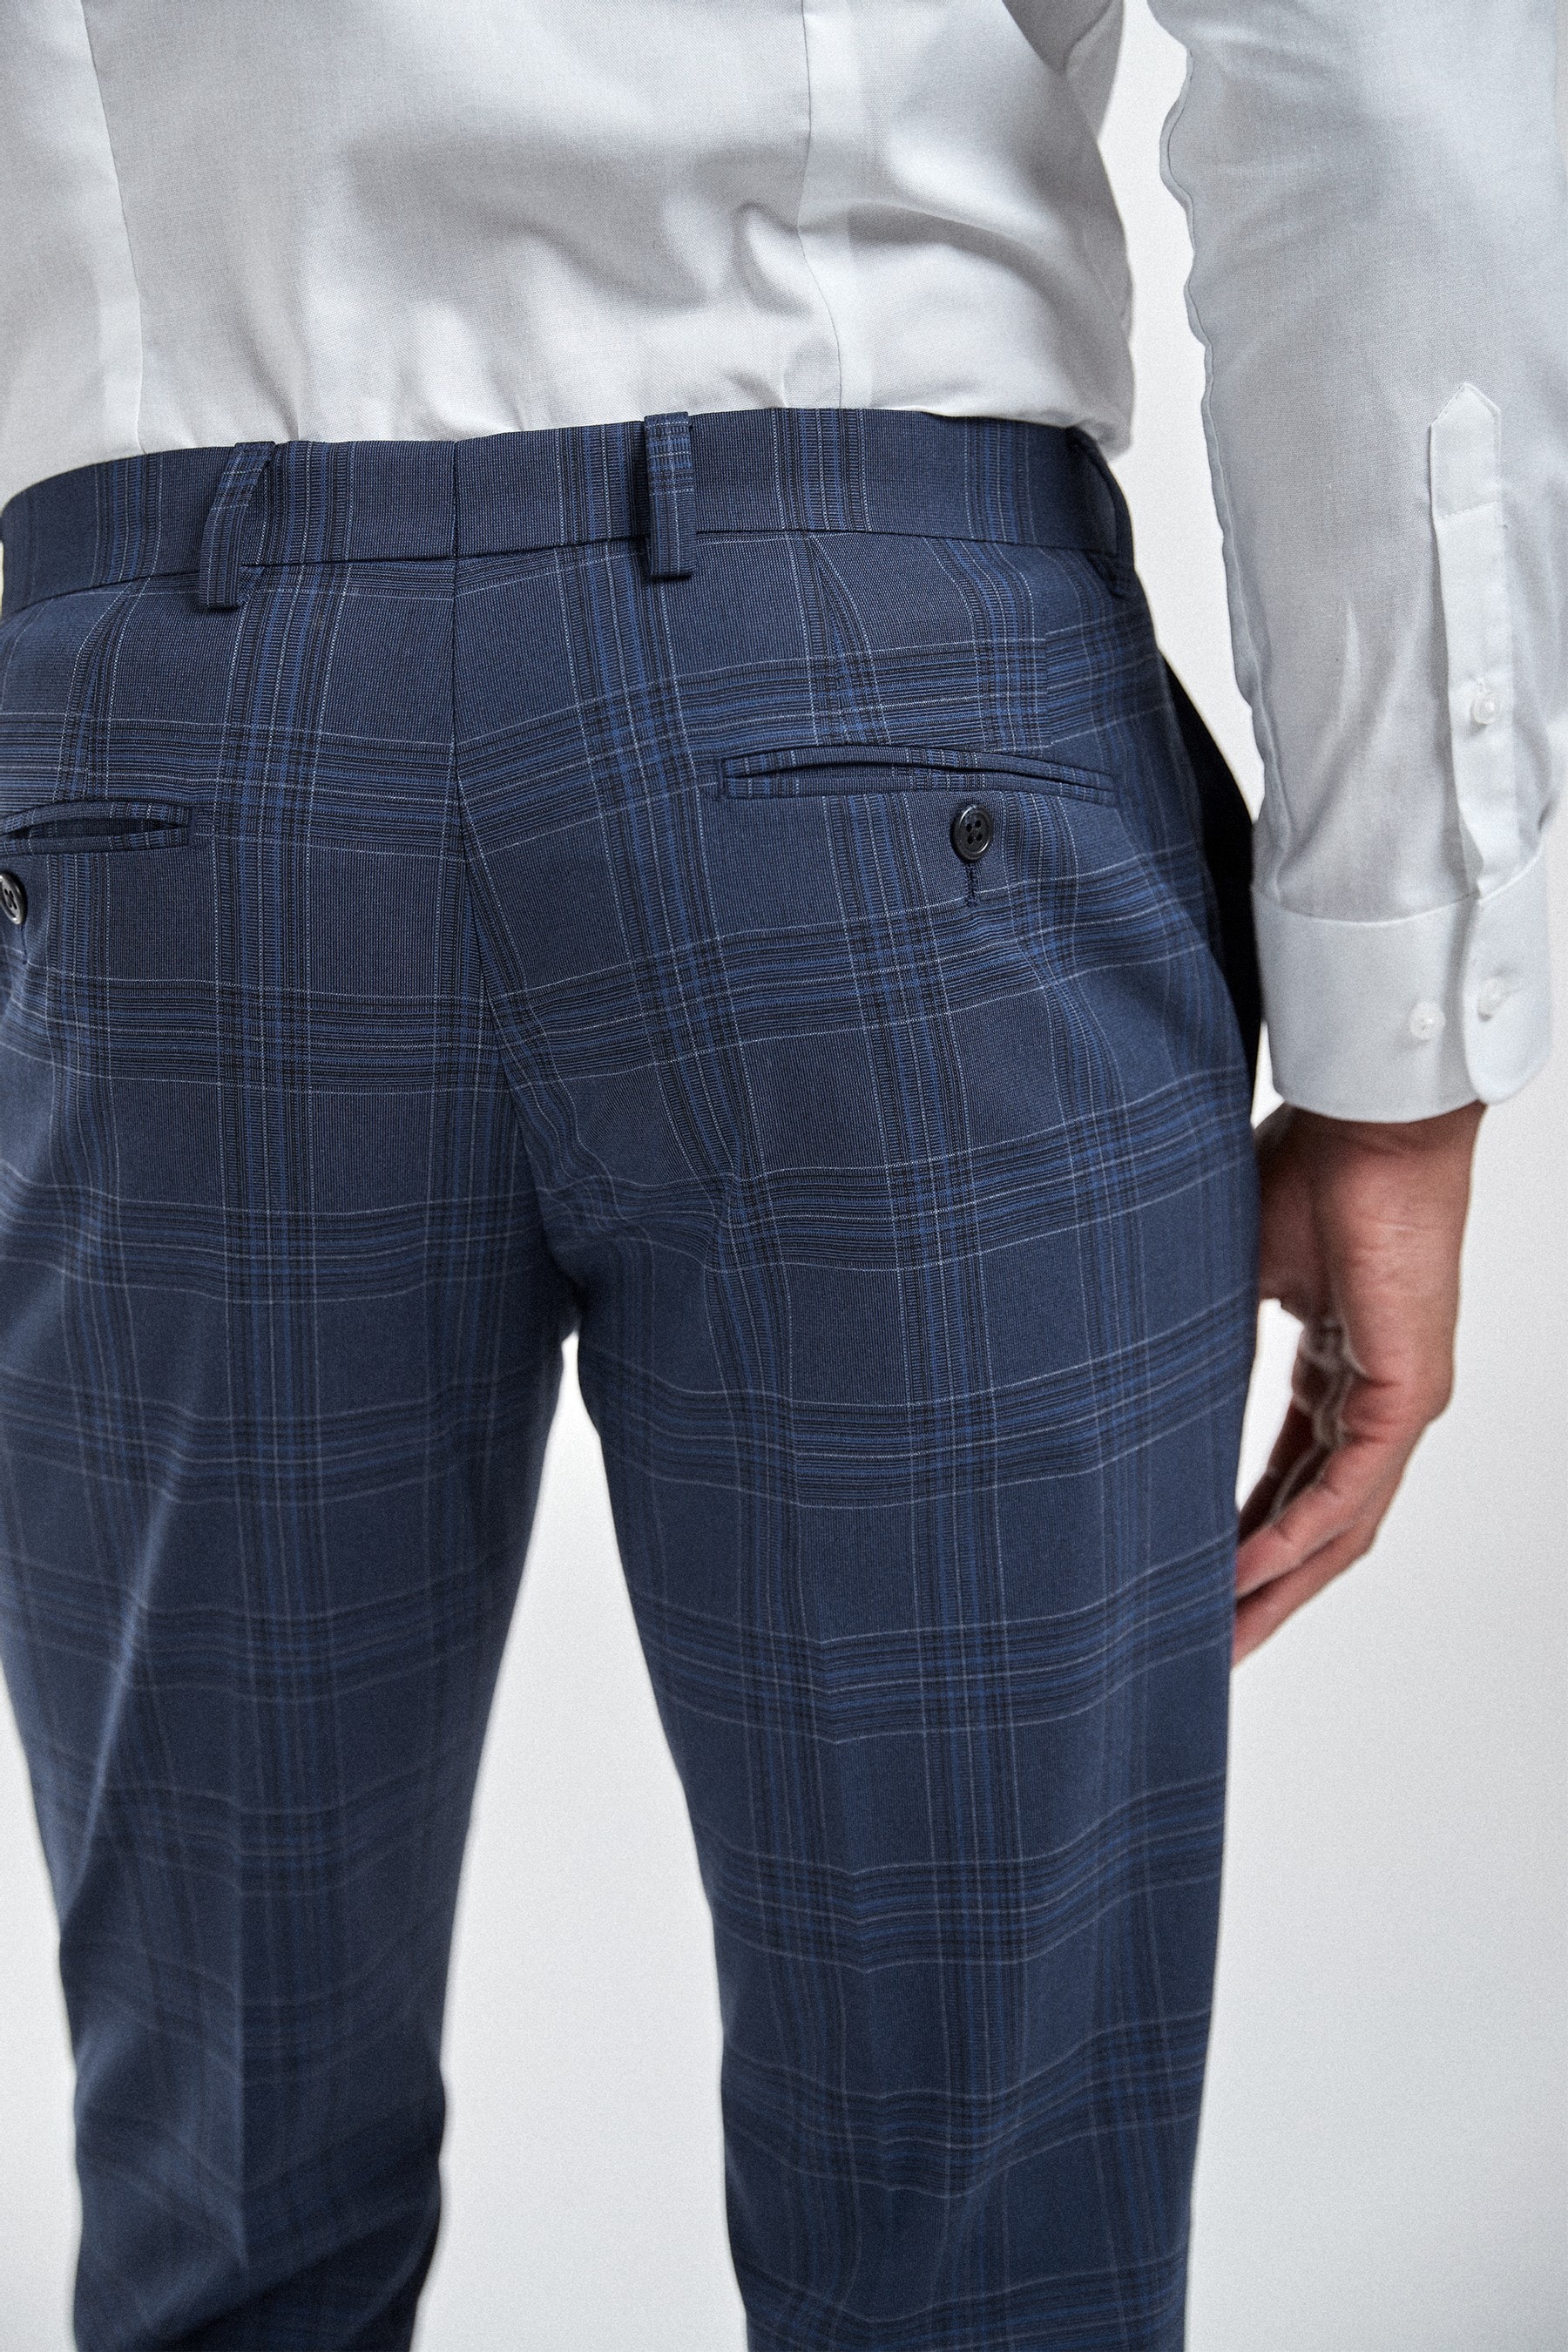 Buy Bright Blue Slim Fit Check Suit: Trousers from the Next UK online shop